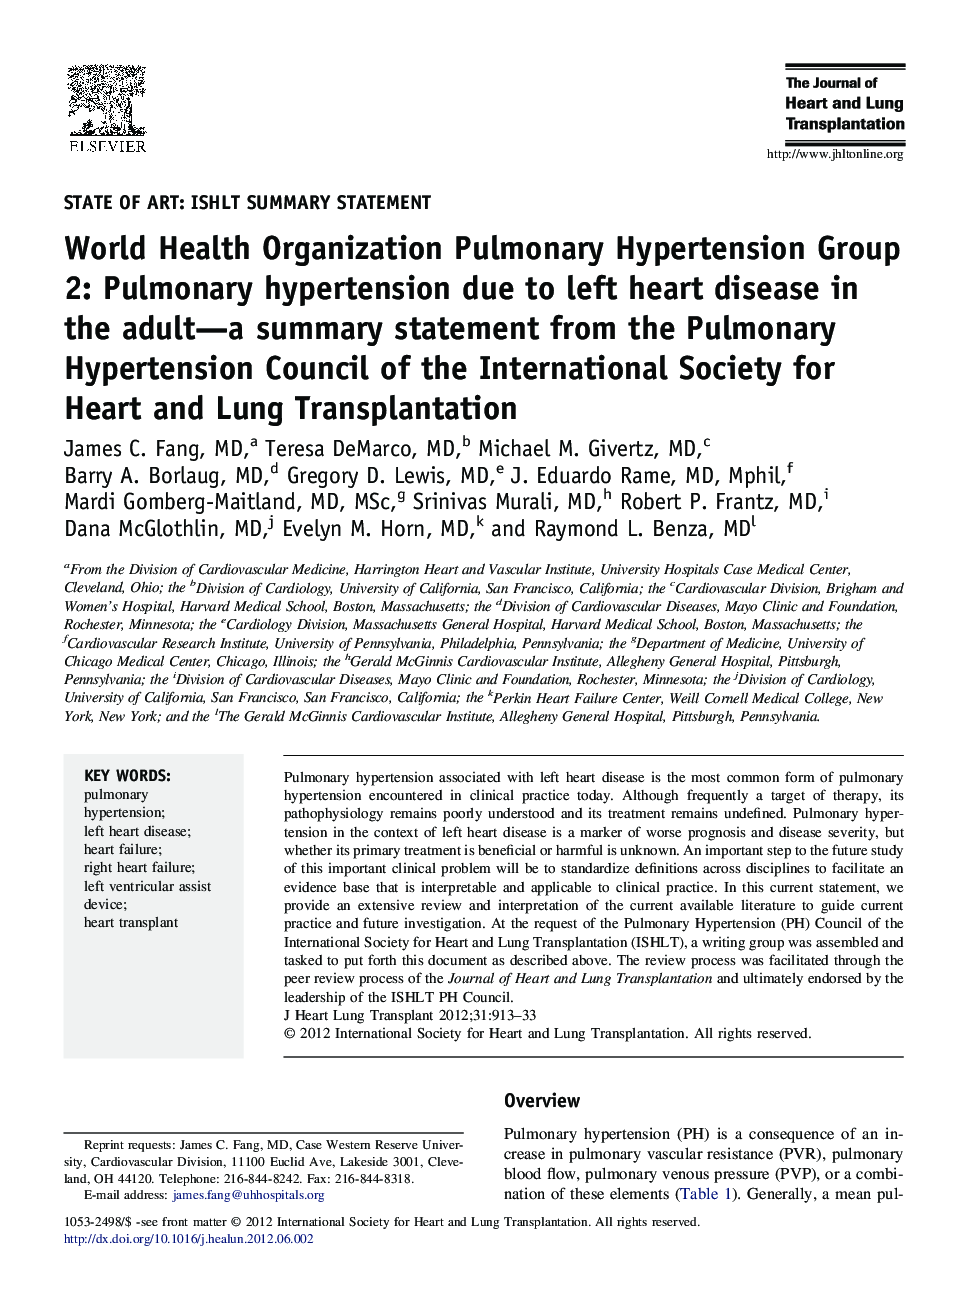 World Health Organization Pulmonary Hypertension Group 2: Pulmonary hypertension due to left heart disease in the adult-a summary statement from the Pulmonary Hypertension Council of the International Society for Heart and Lung Transplantation